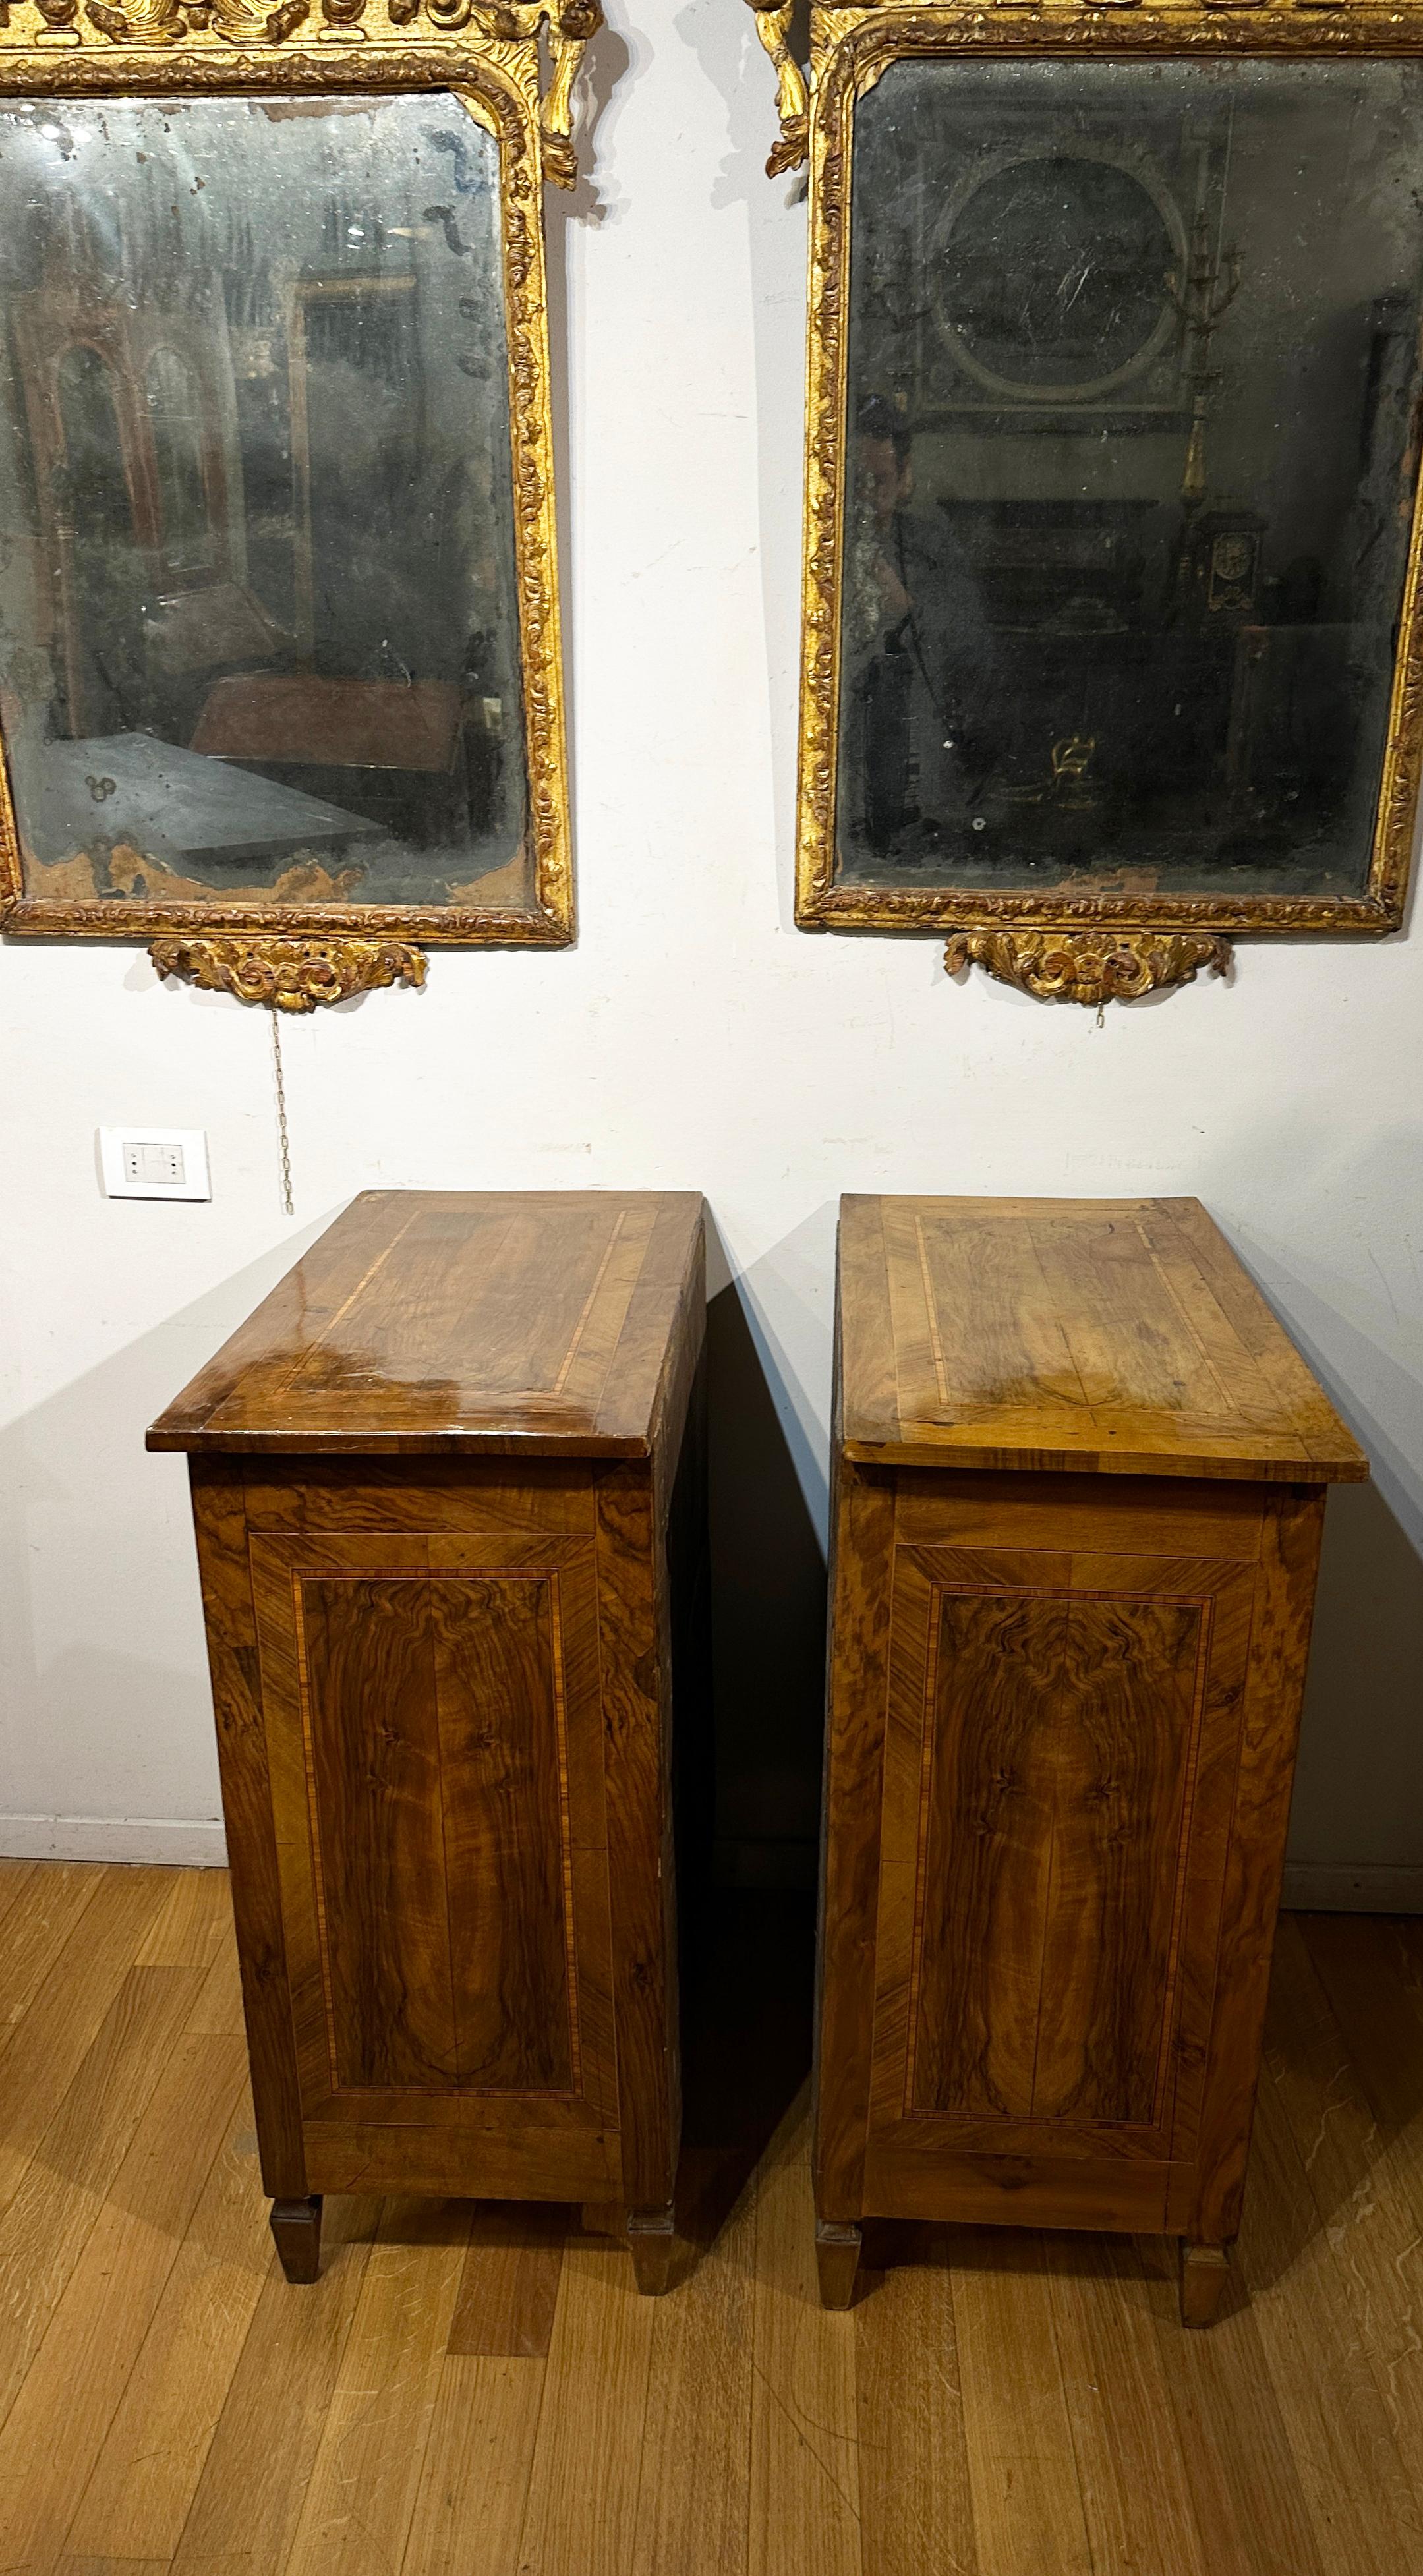 18th Century END OF THE 18th CENTURY VENETIAN SMALL-DRAWERS